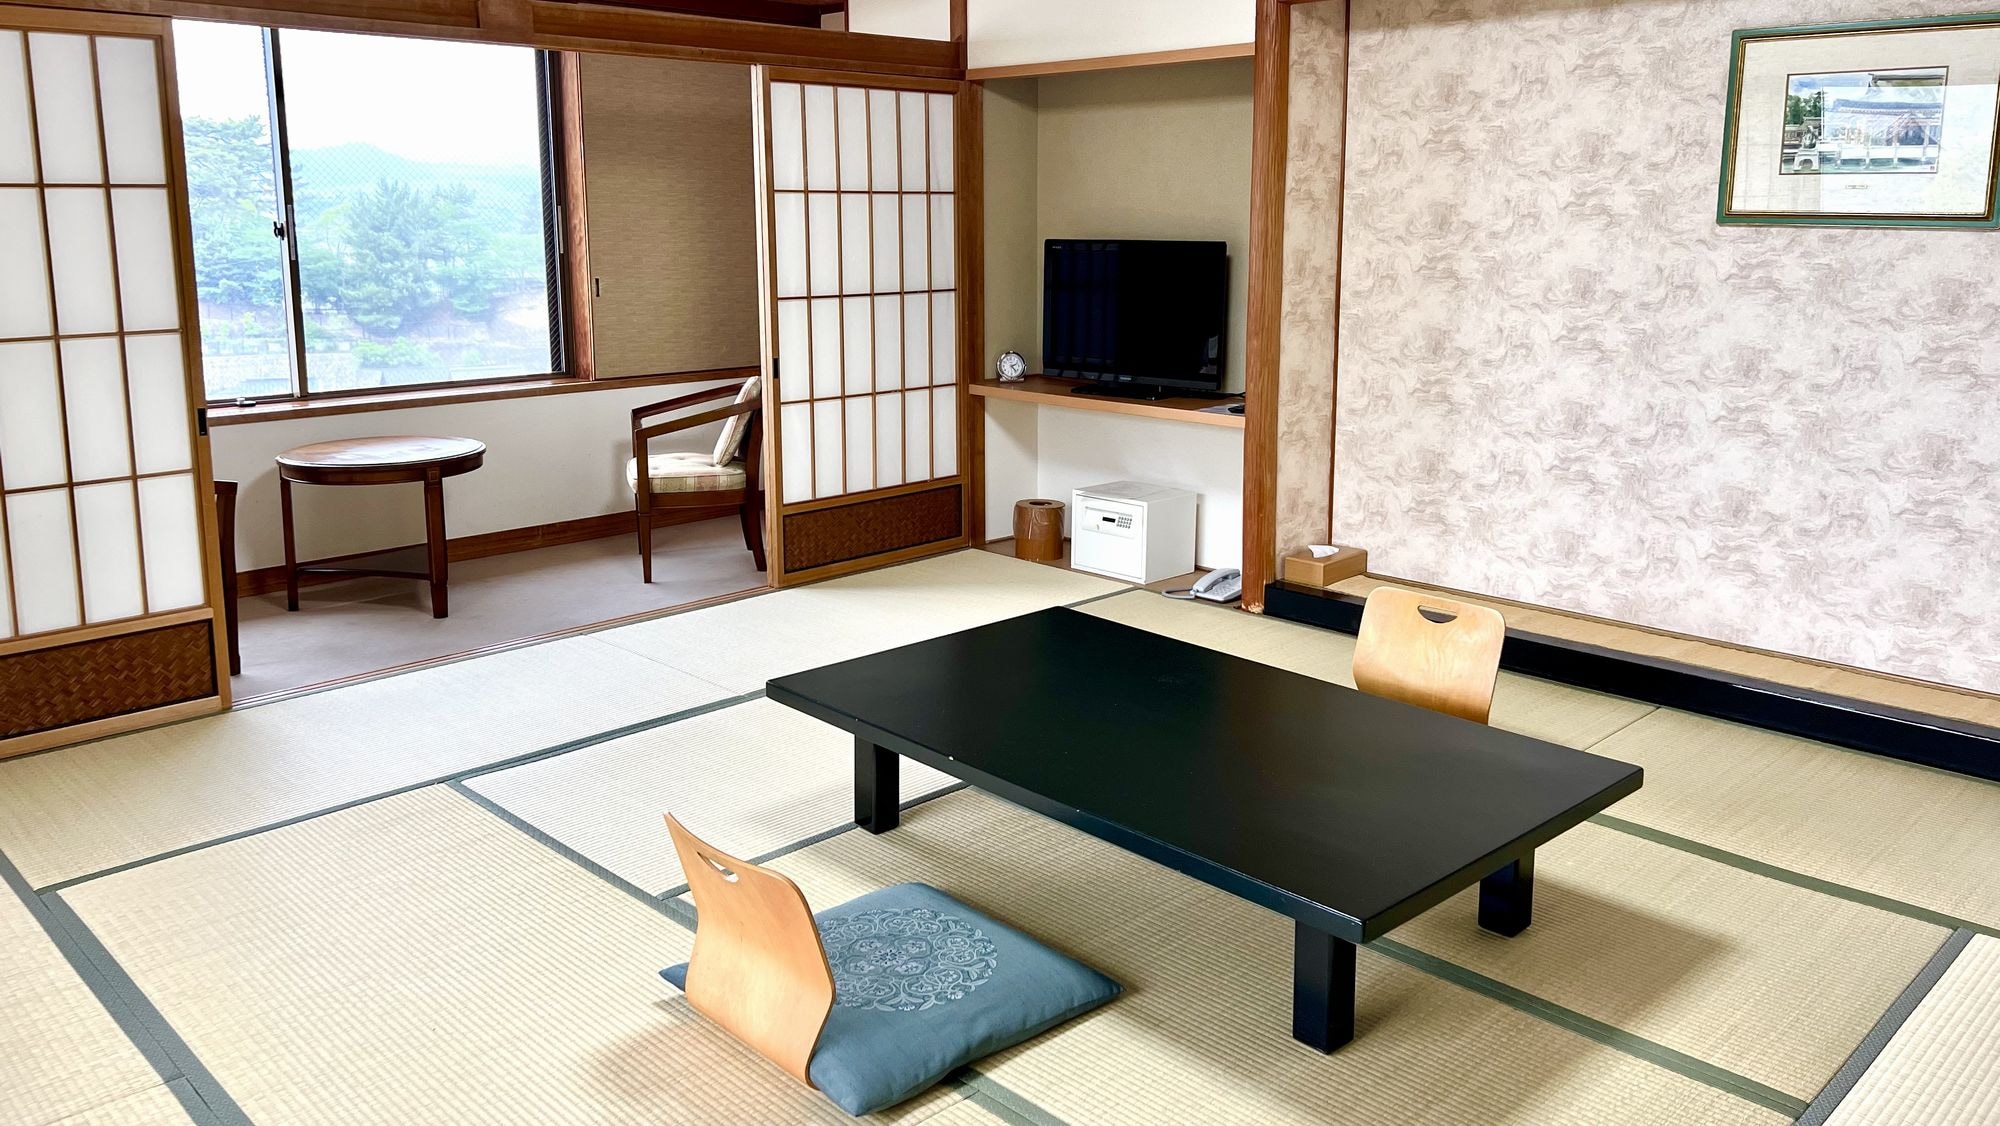 An example of a Japanese-style room (view sea side)